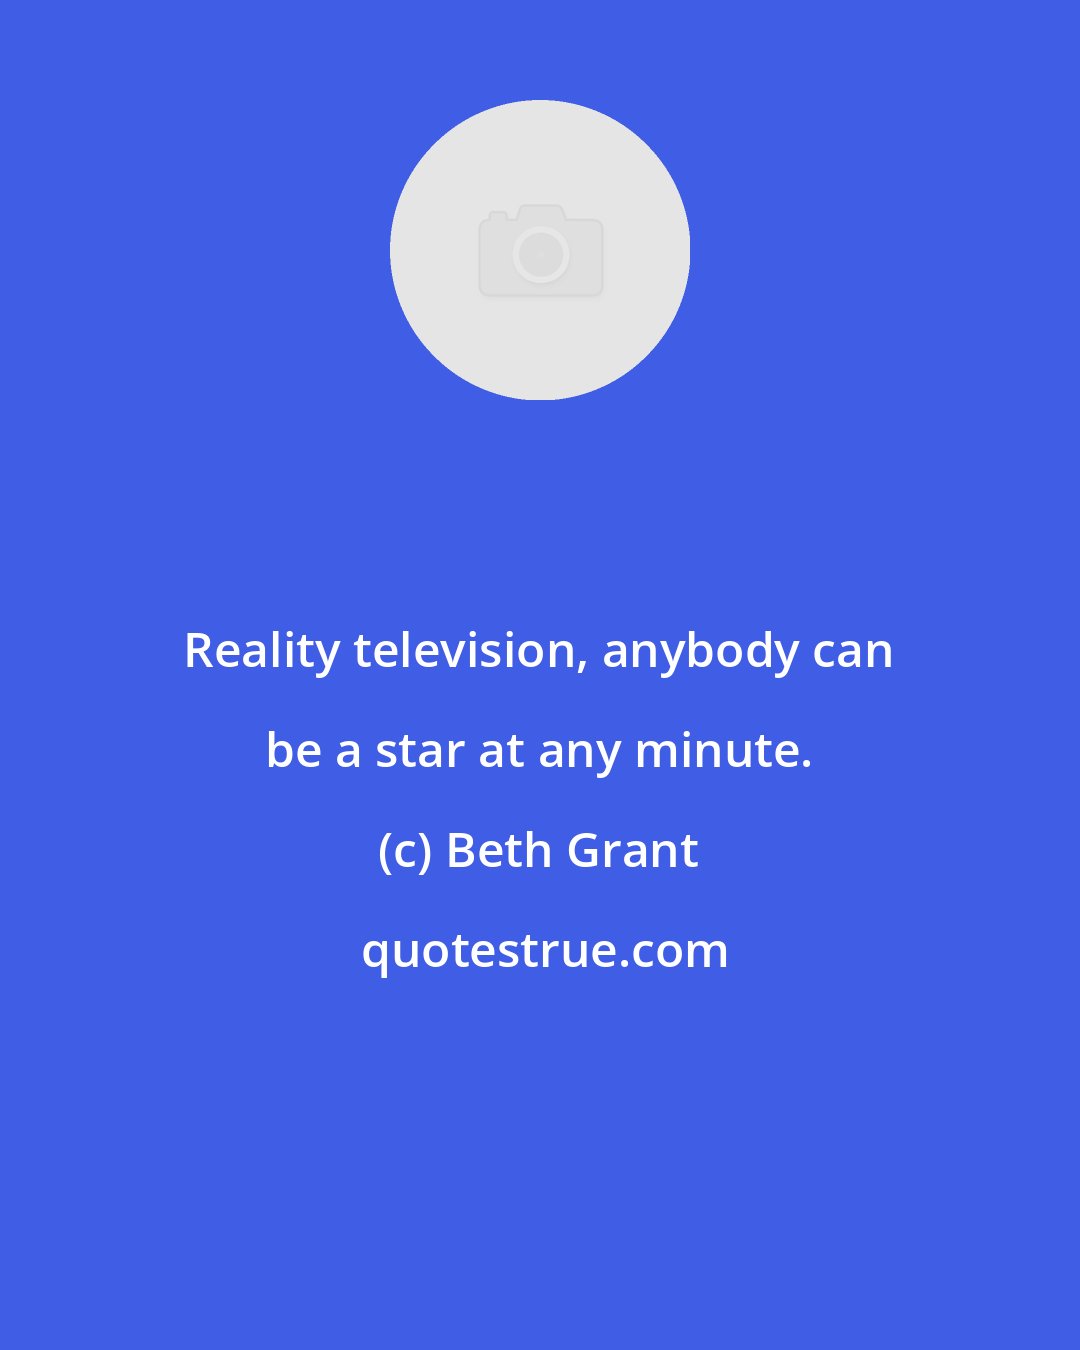 Beth Grant: Reality television, anybody can be a star at any minute.